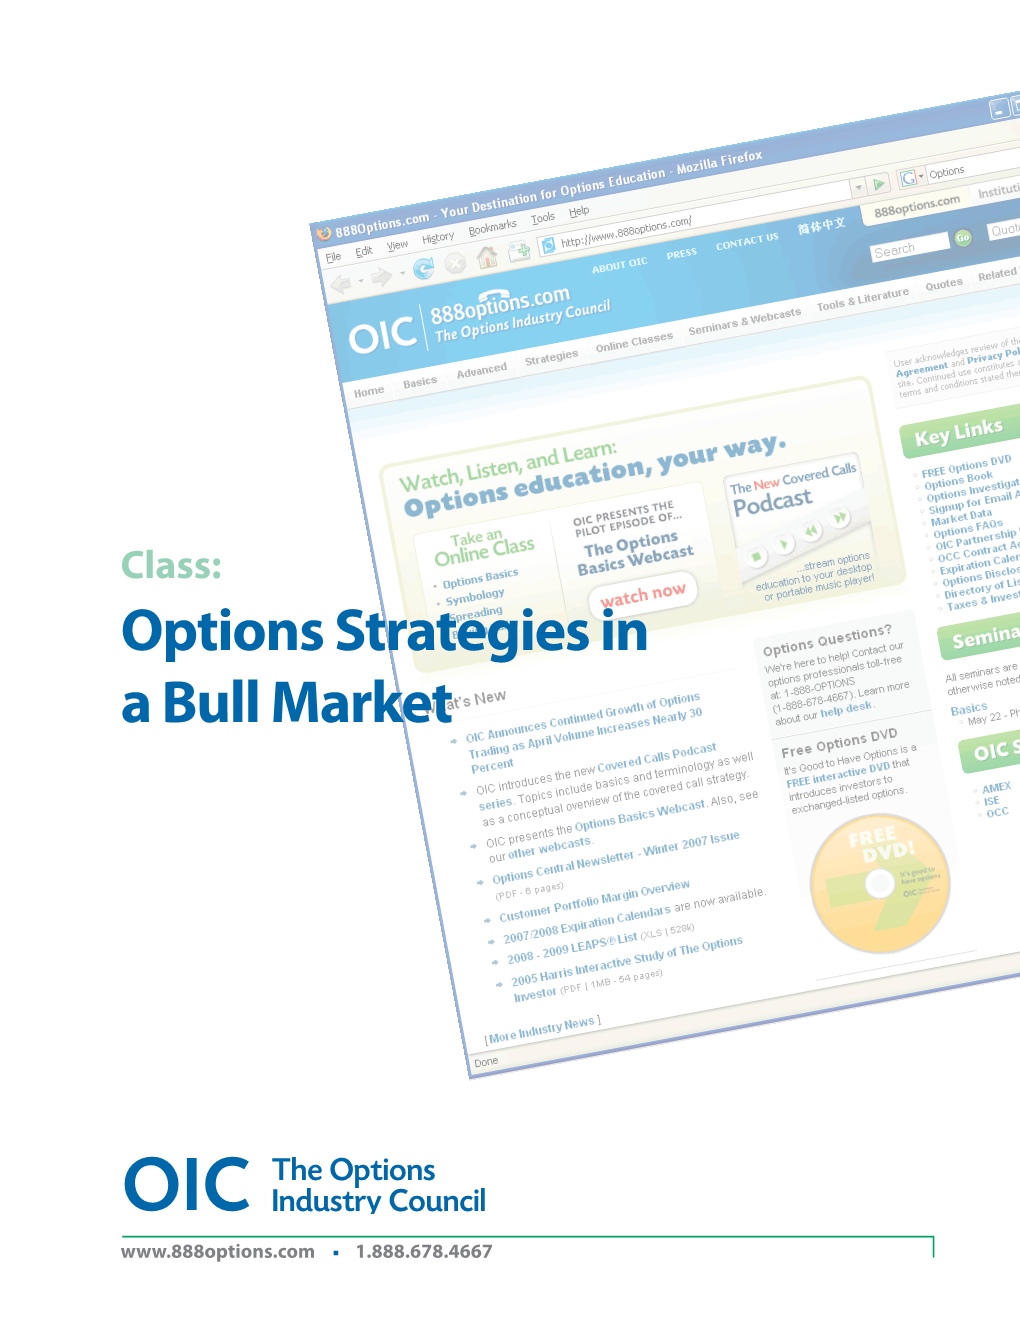 Options Strategies in a Bull Market Course